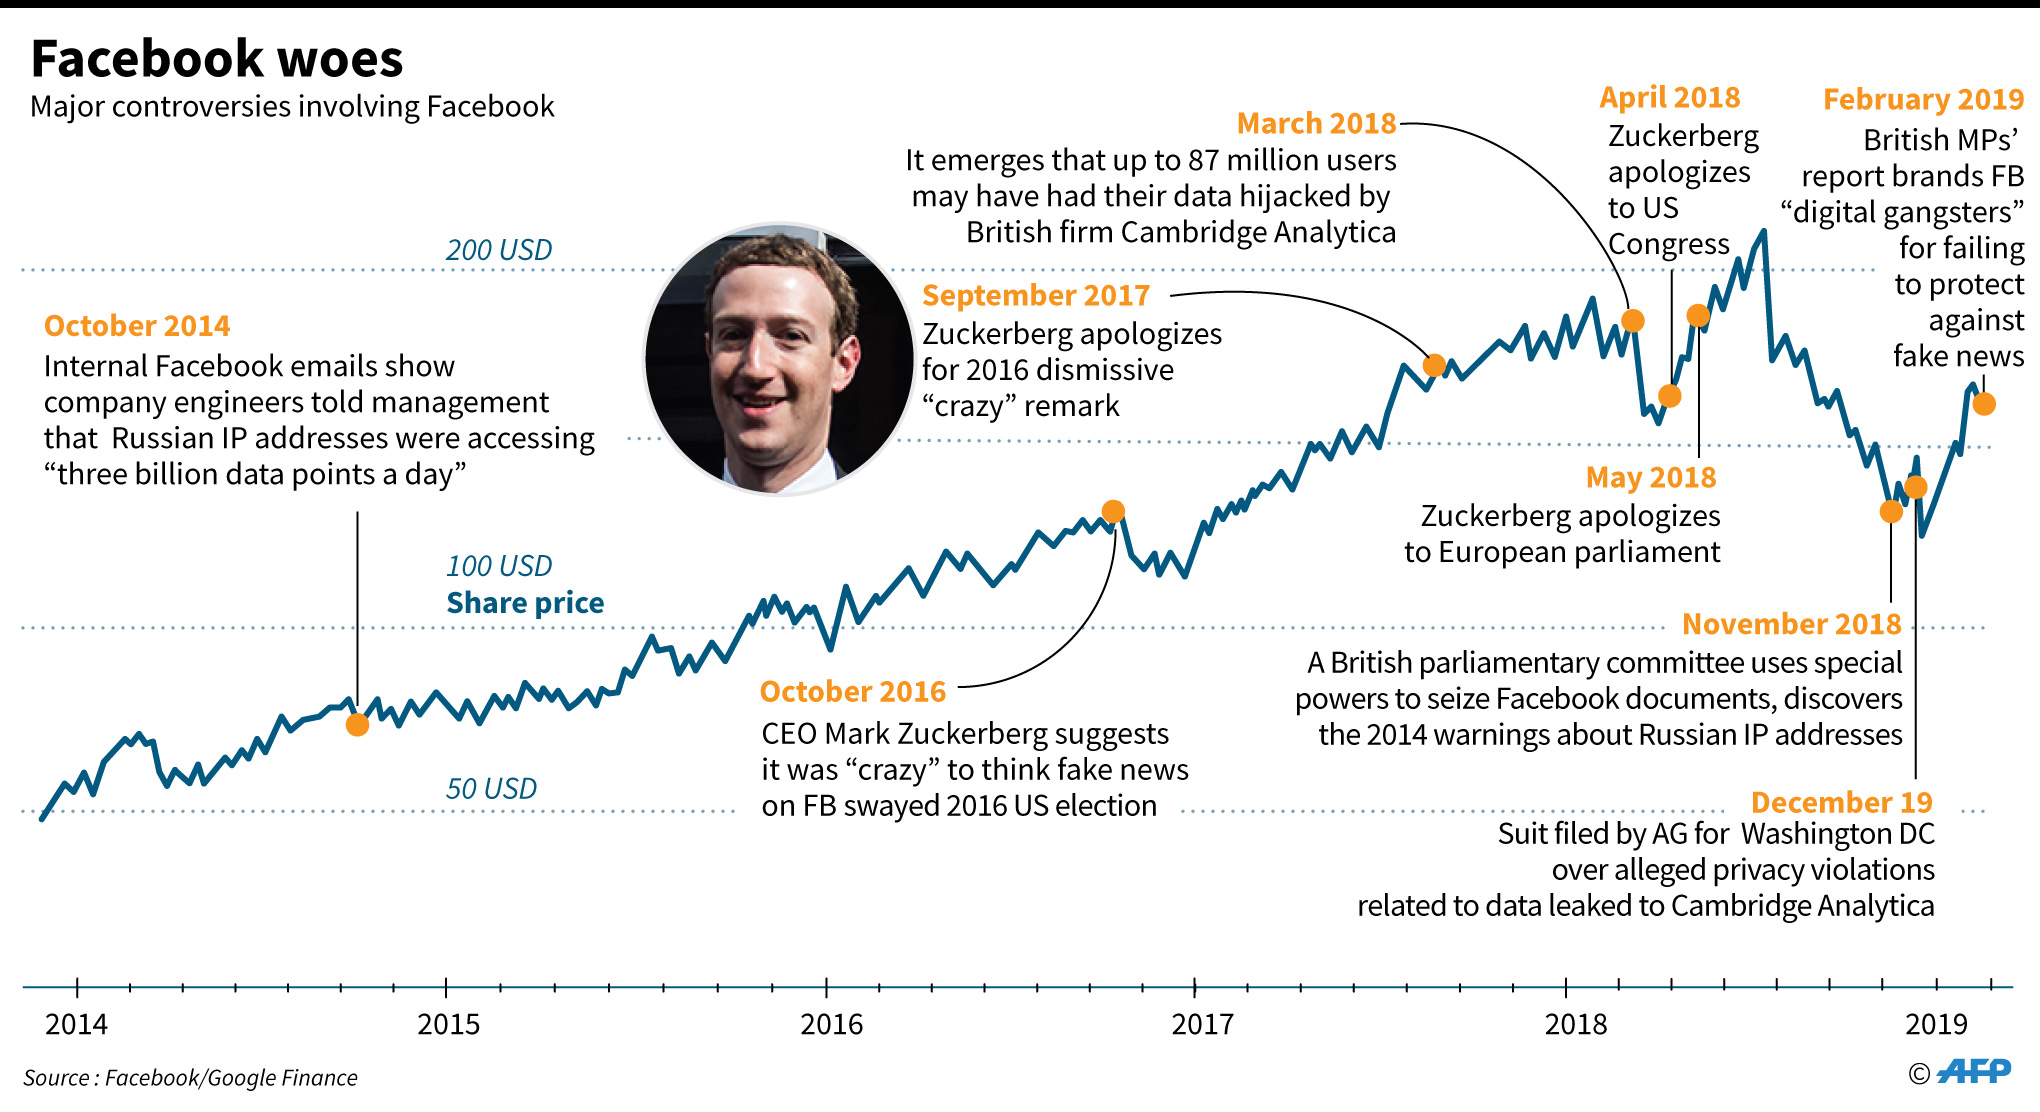 Graphic looking at controversies involving Facebook, plus share price since 2014.